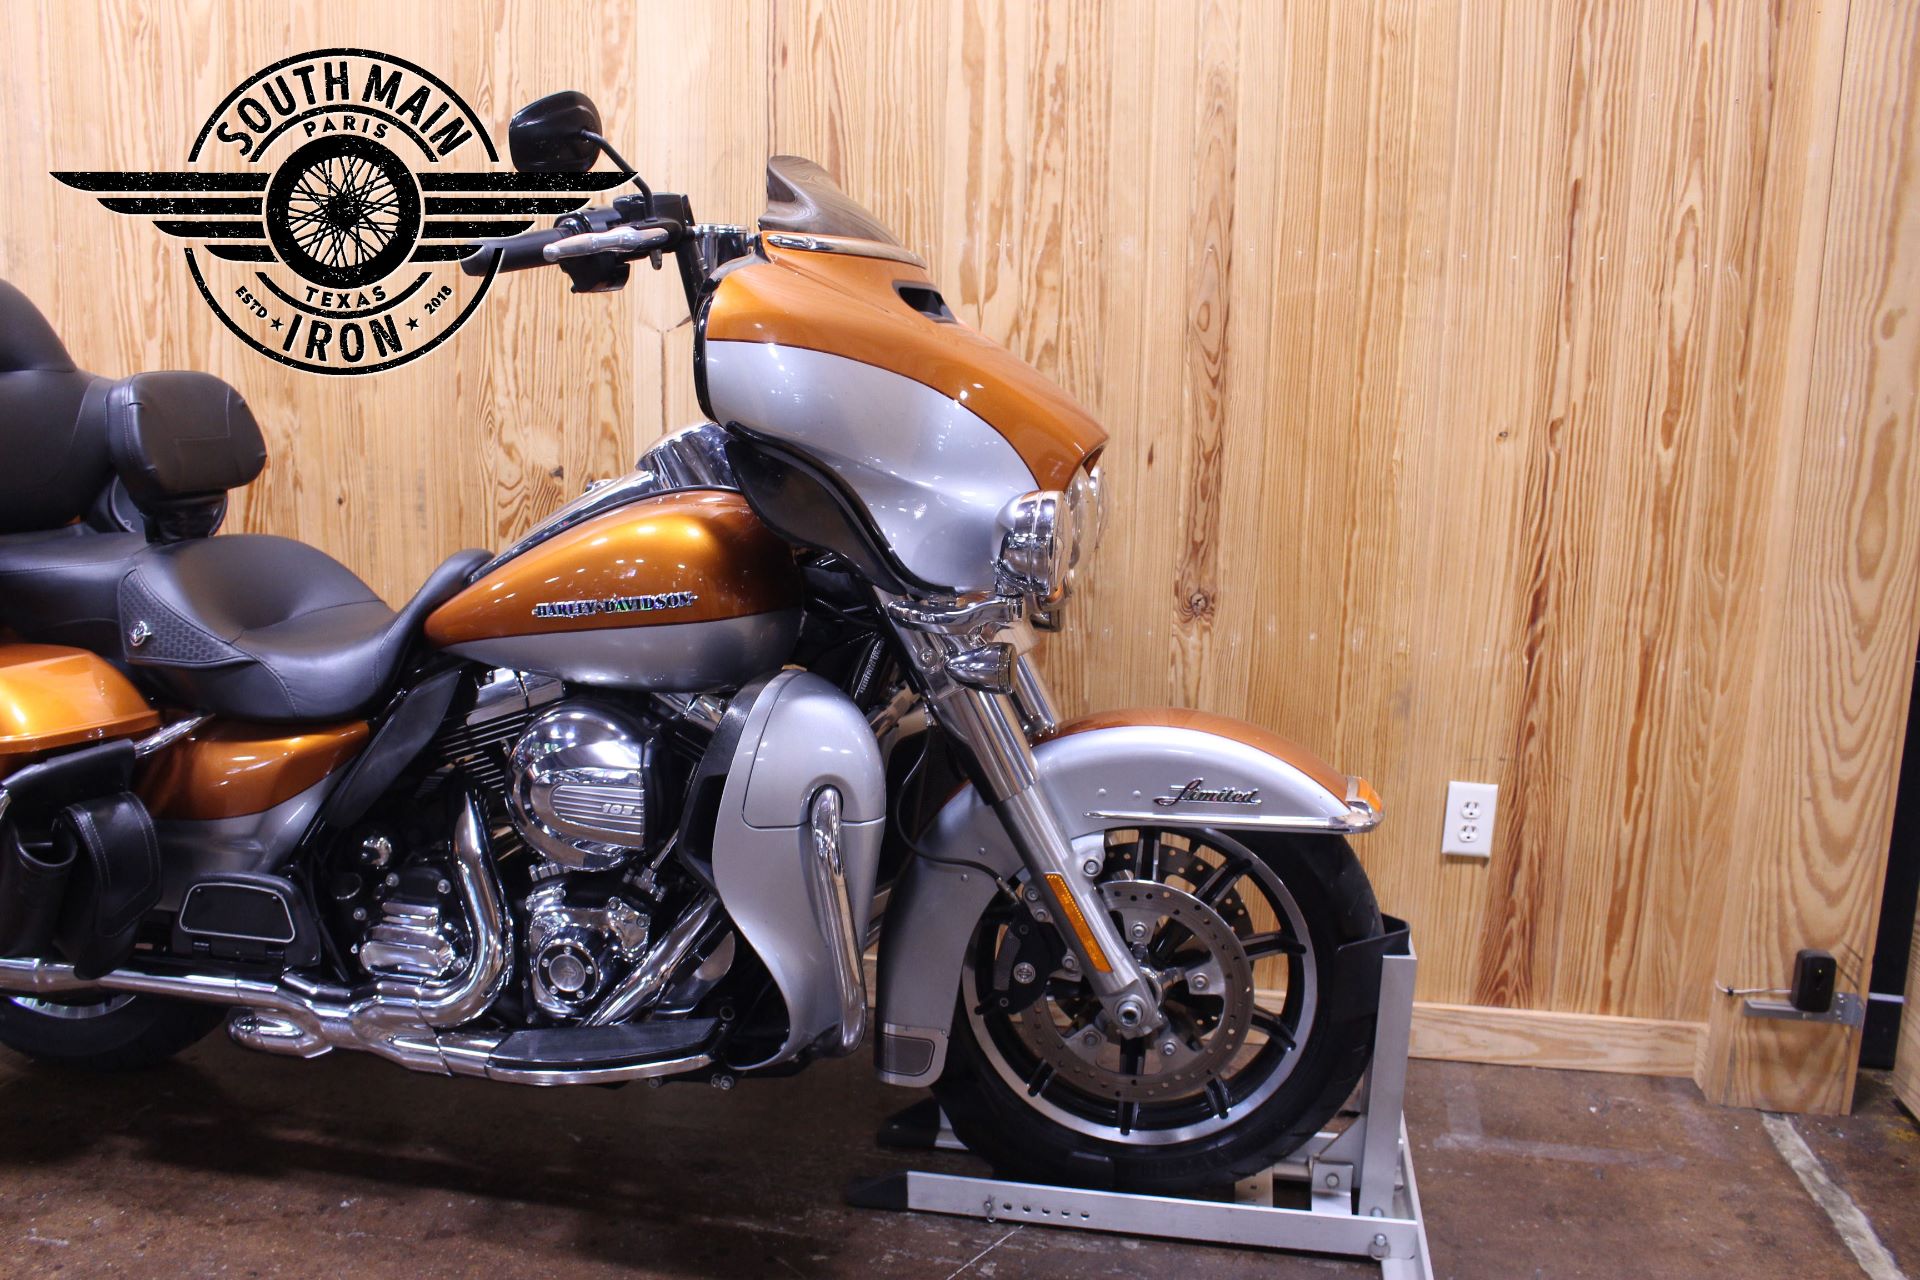 2014 Harley-Davidson Ultra Limited in Paris, Texas - Photo 2